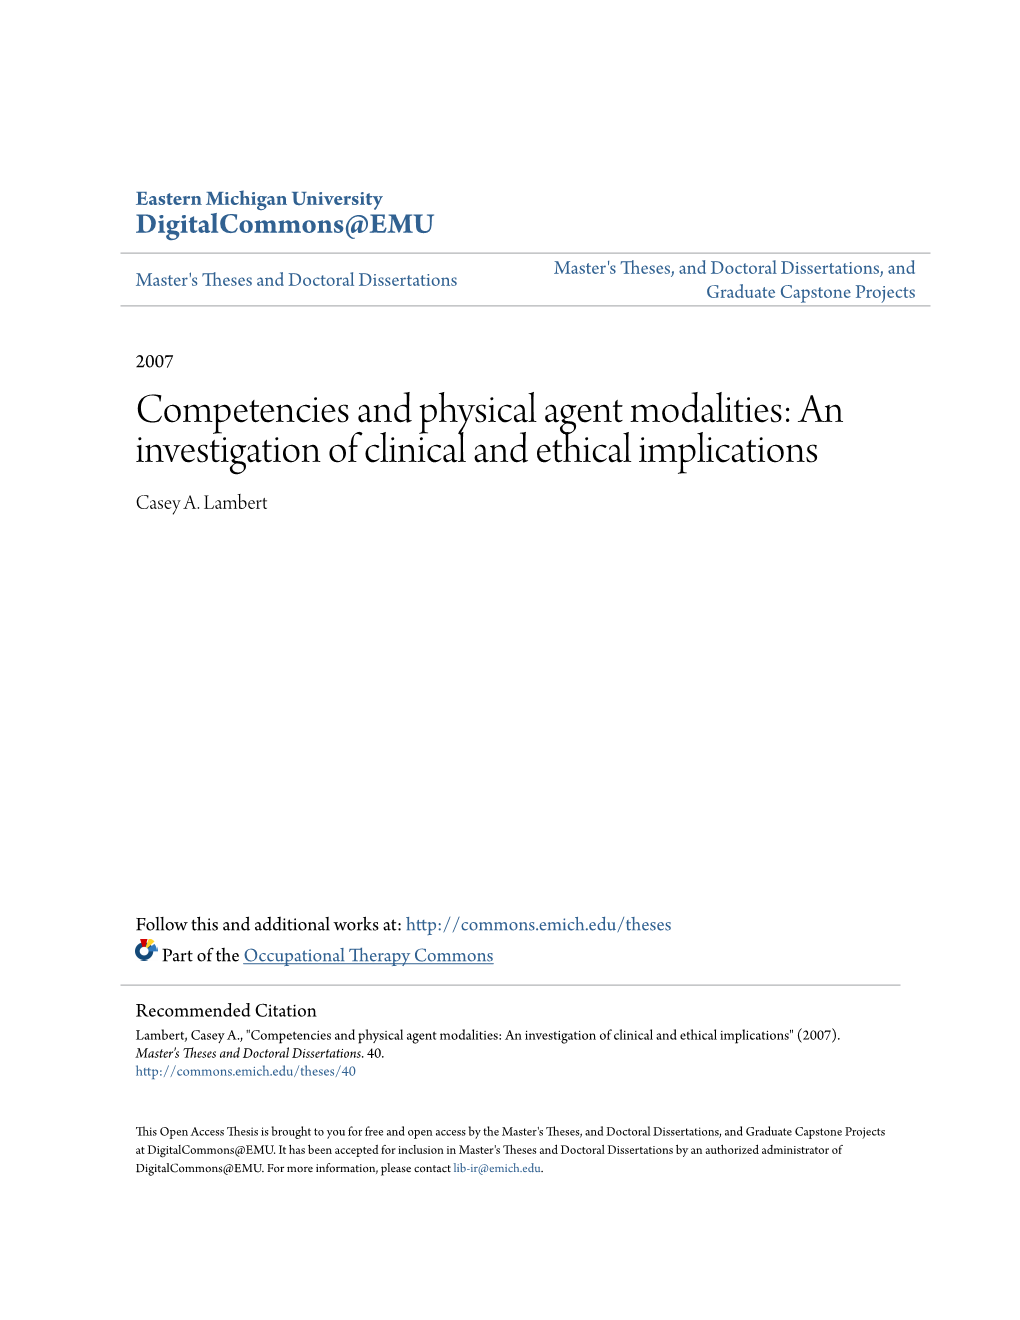 Competencies and Physical Agent Modalities: an Investigation of Clinical and Ethical Implications Casey A